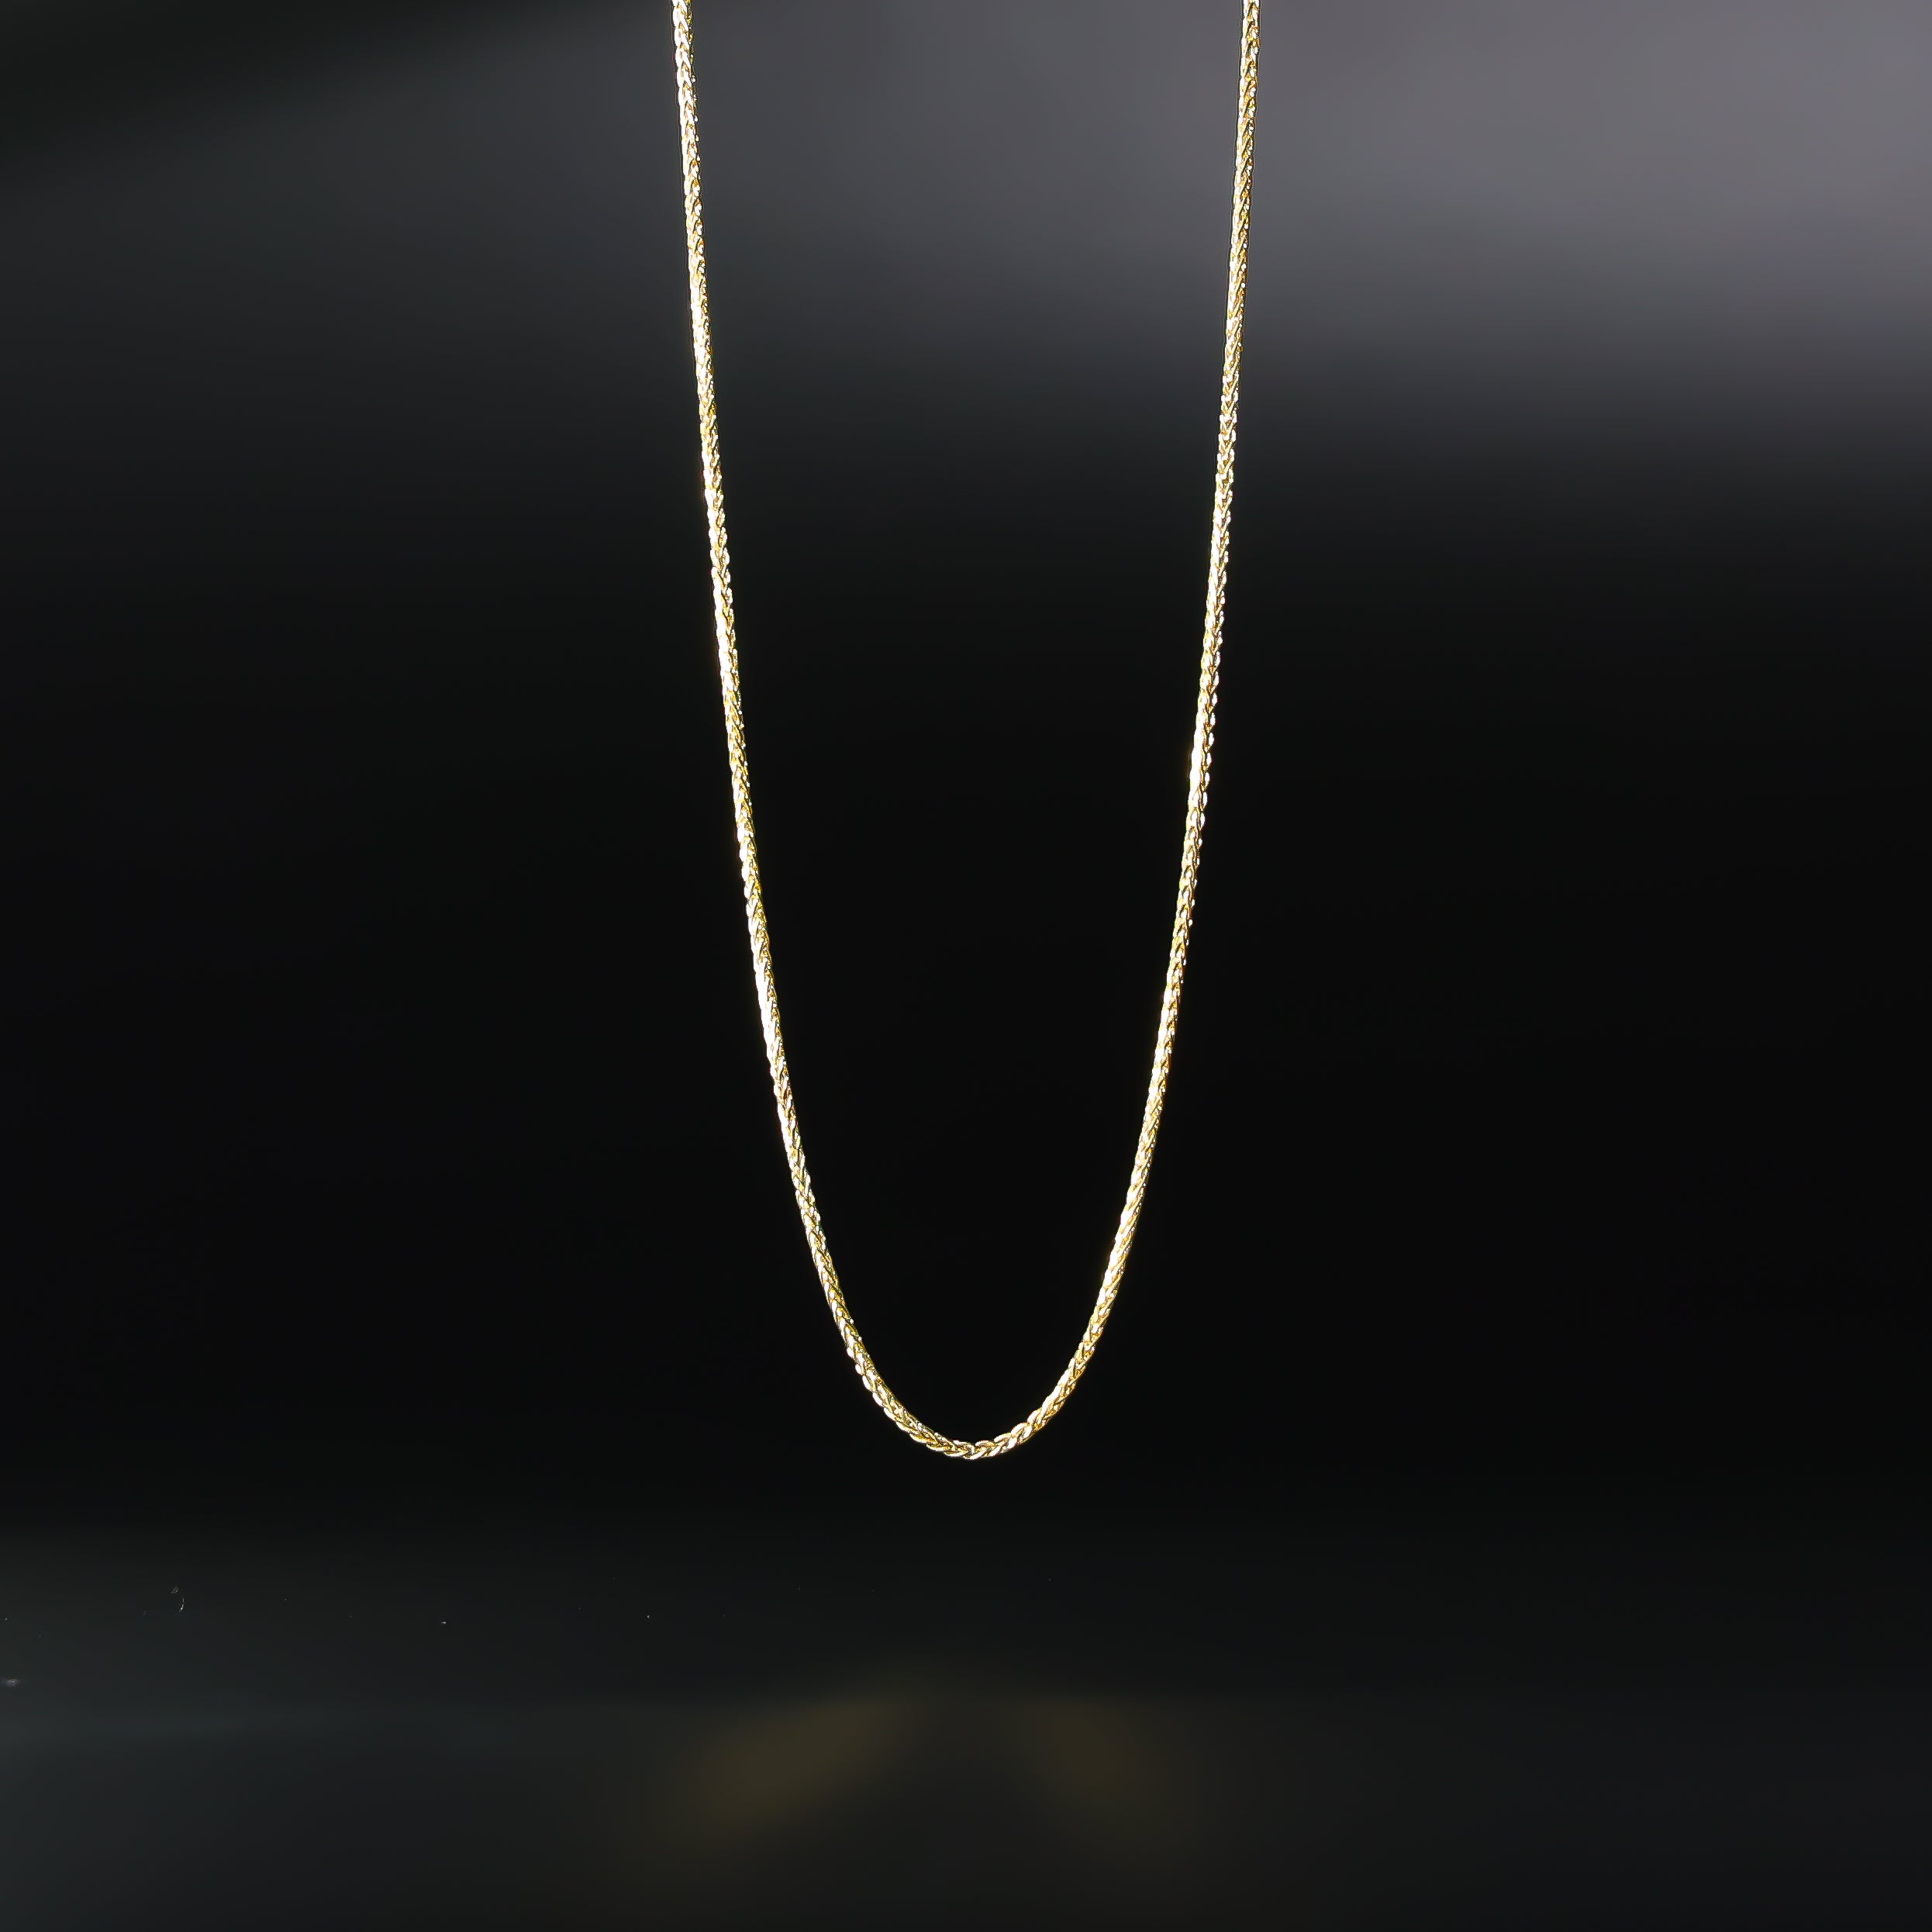 1mm 14k Solid Gold Wheat Link Chain Model-0545 - Charlie & Co. Jewelry